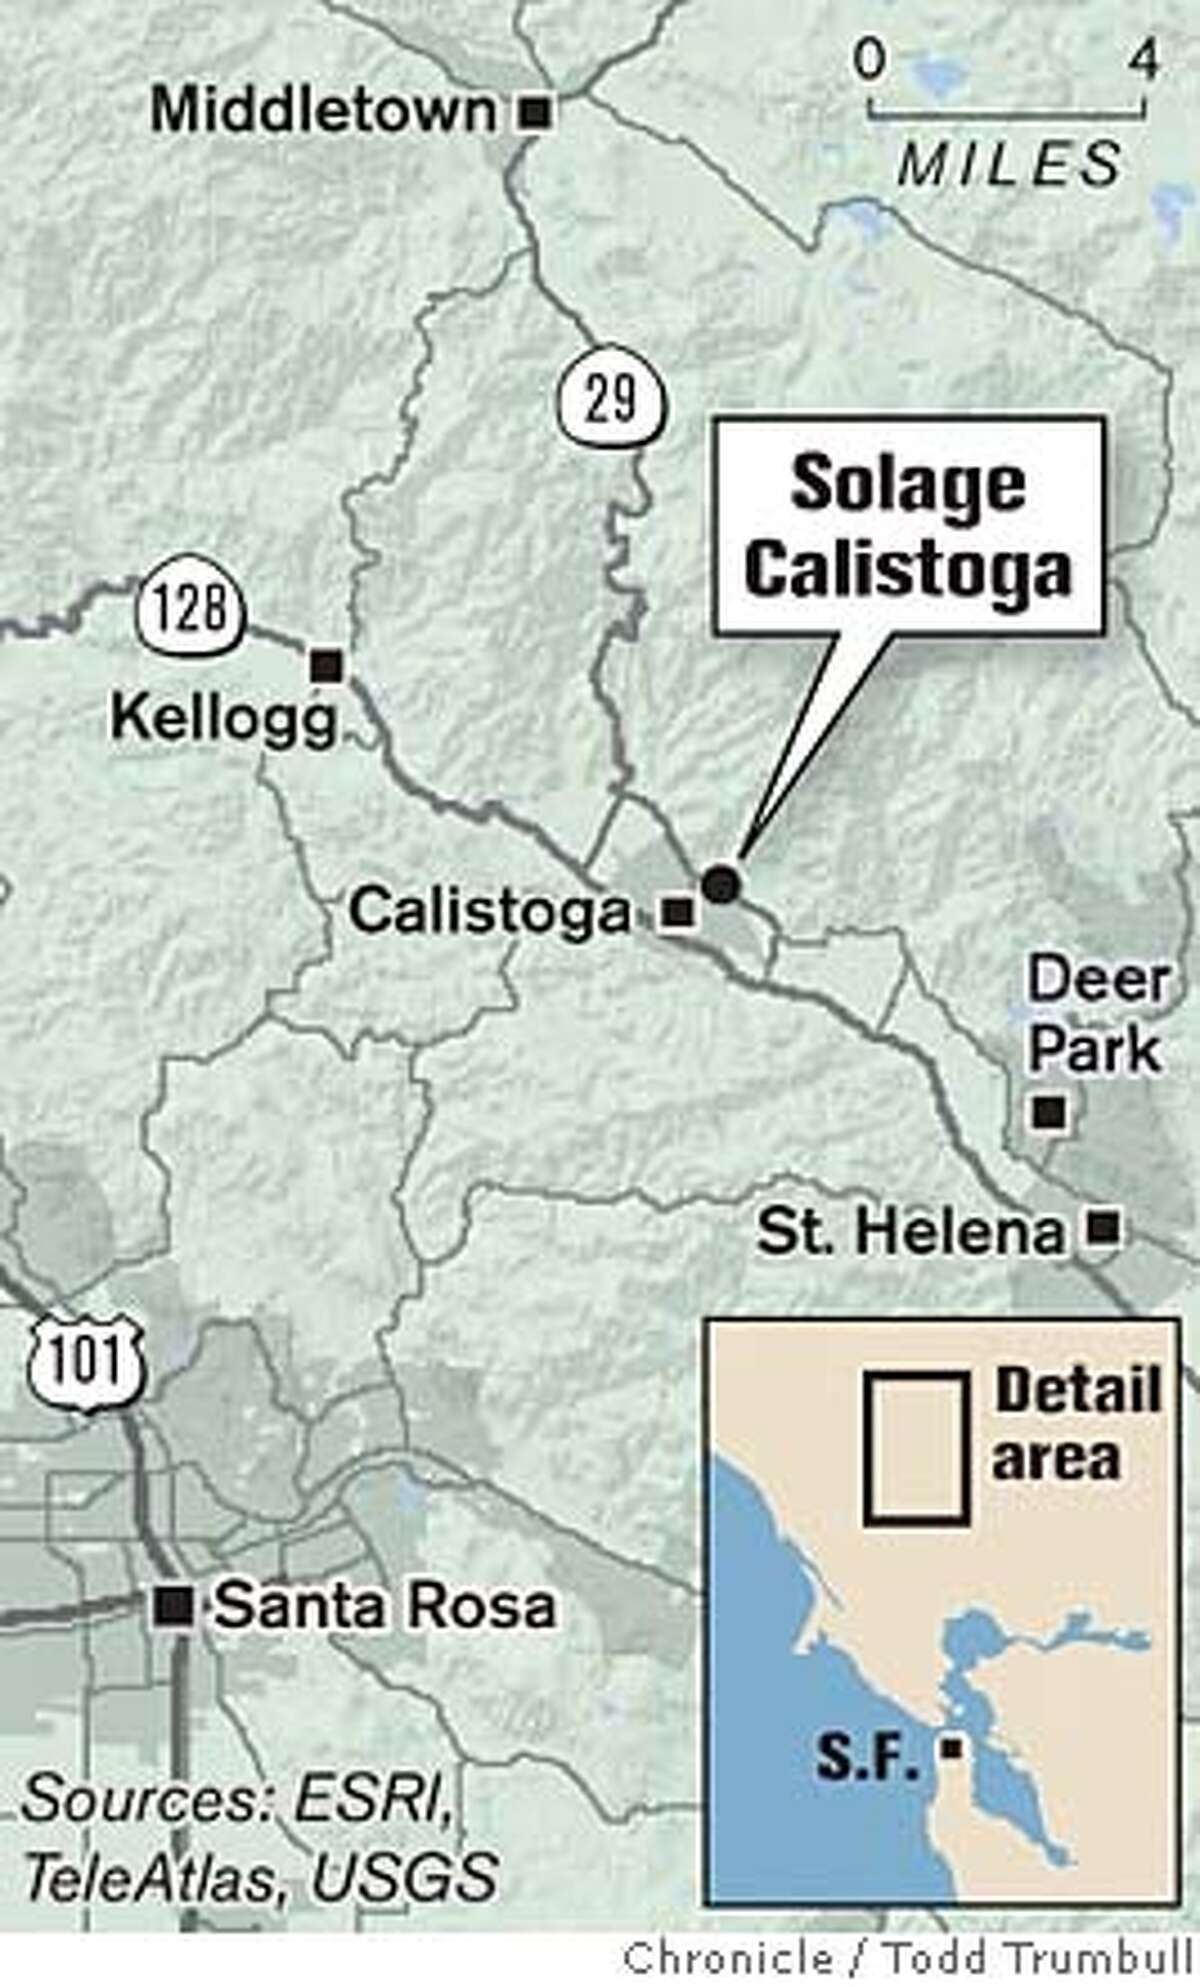 Solage Calistoga. Chronicle photo by Todd Trumbull